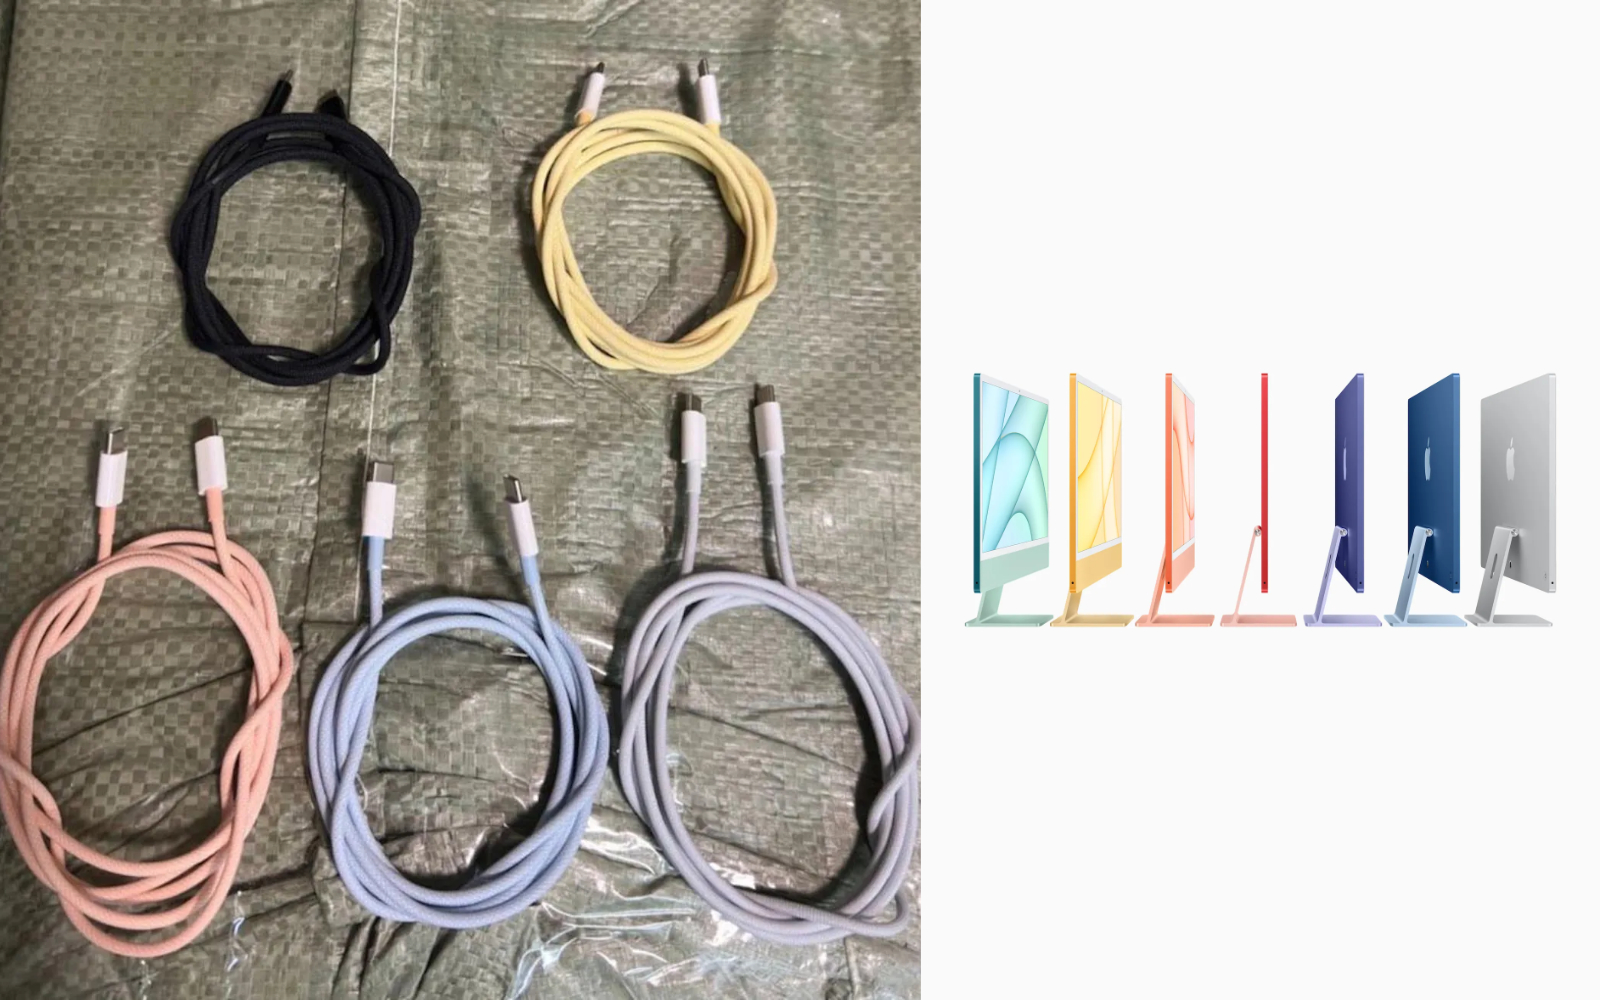 Imac and usbc cables 2